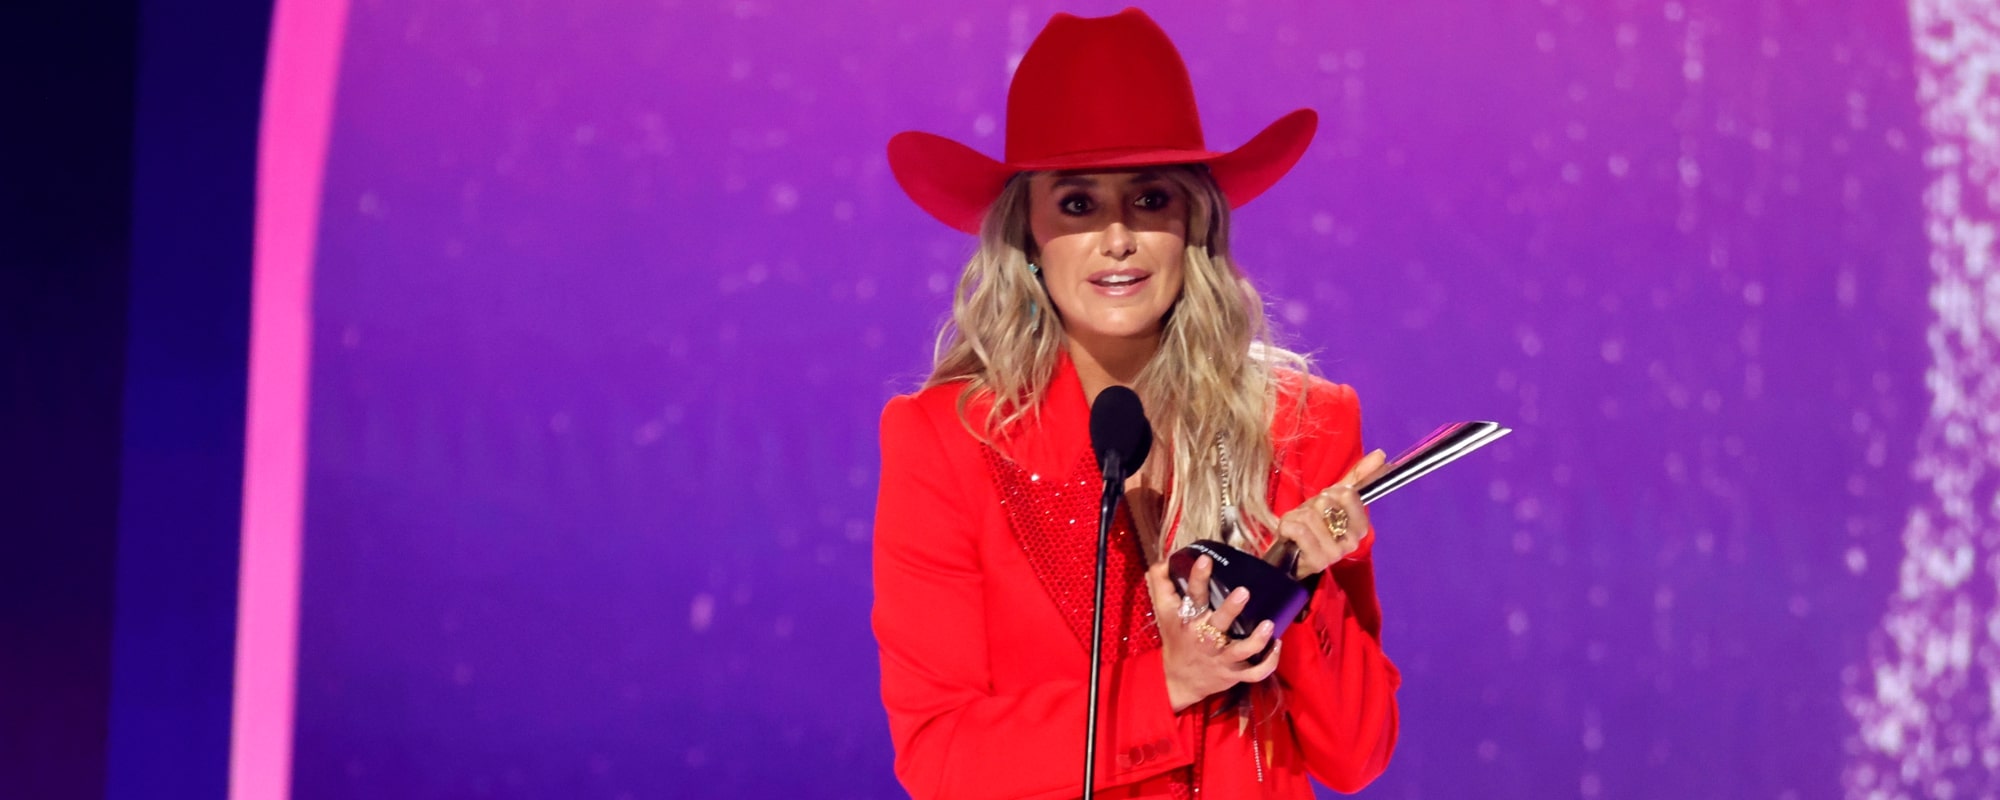 Lainey Wilson Dedicates Her Female Artist of the Year Award to the Women in Country Music: “Iron Sharpens Iron”